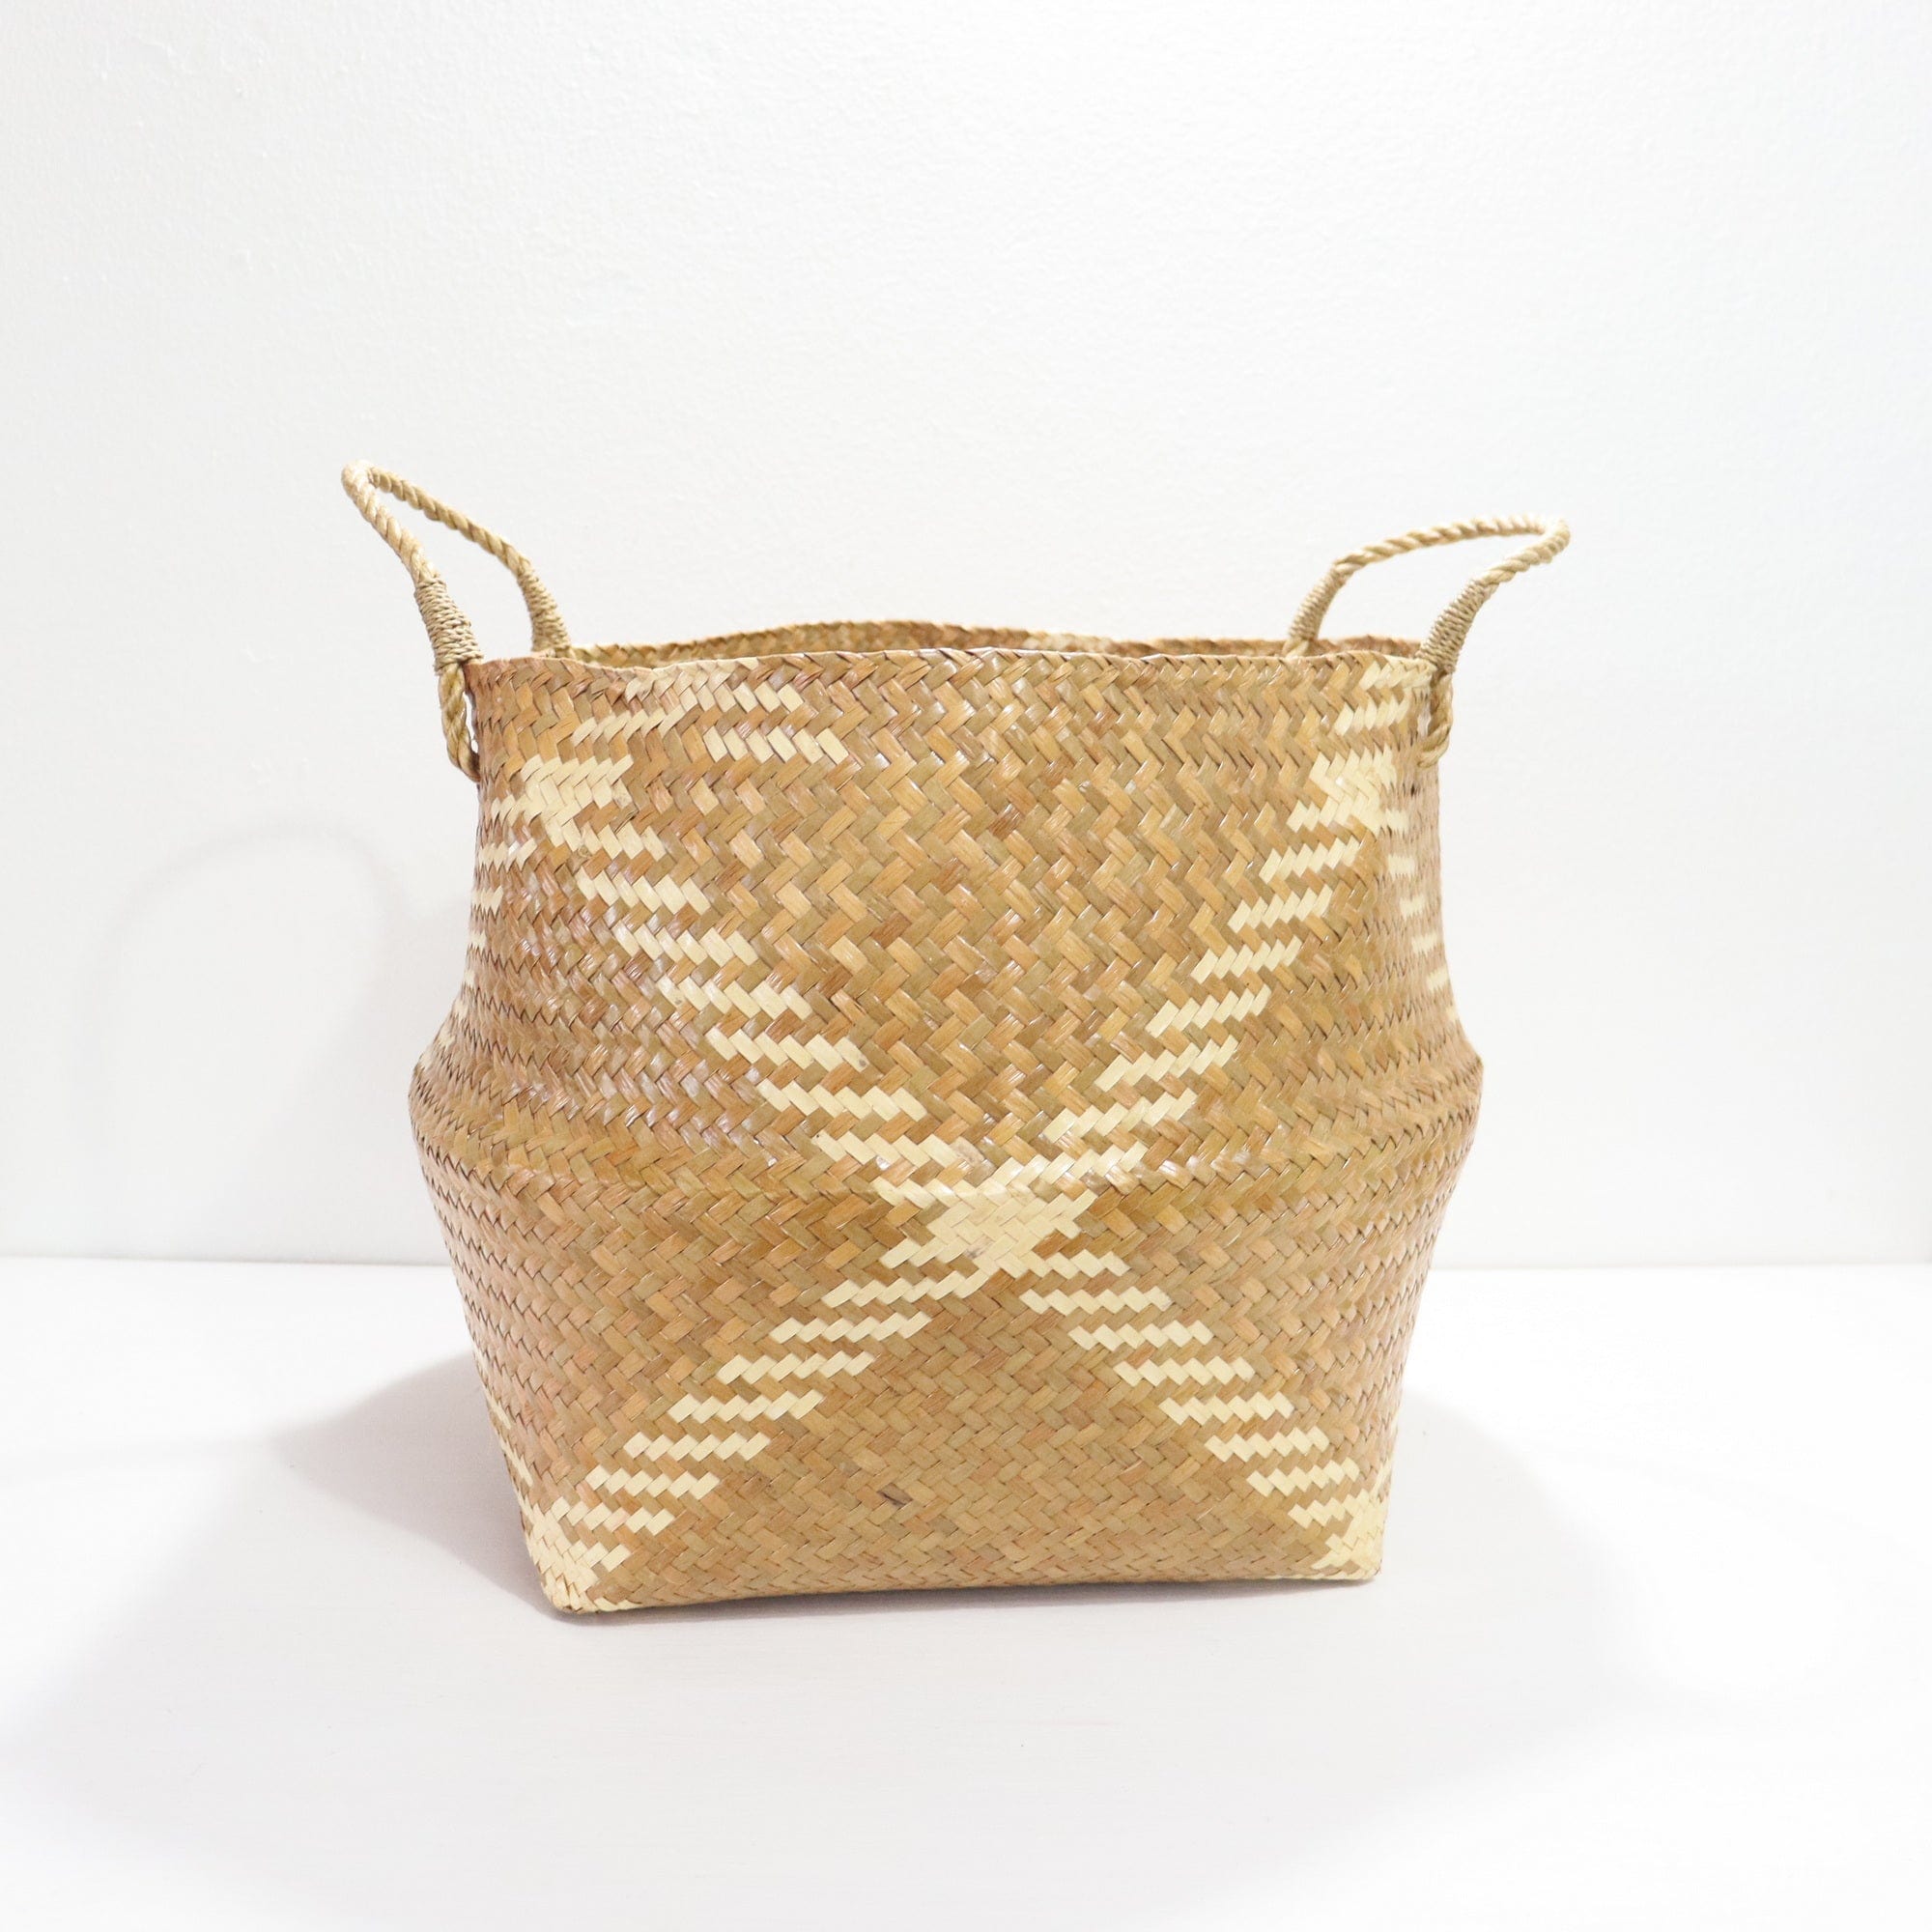 WI LAI - Wicker Basket 14 inches